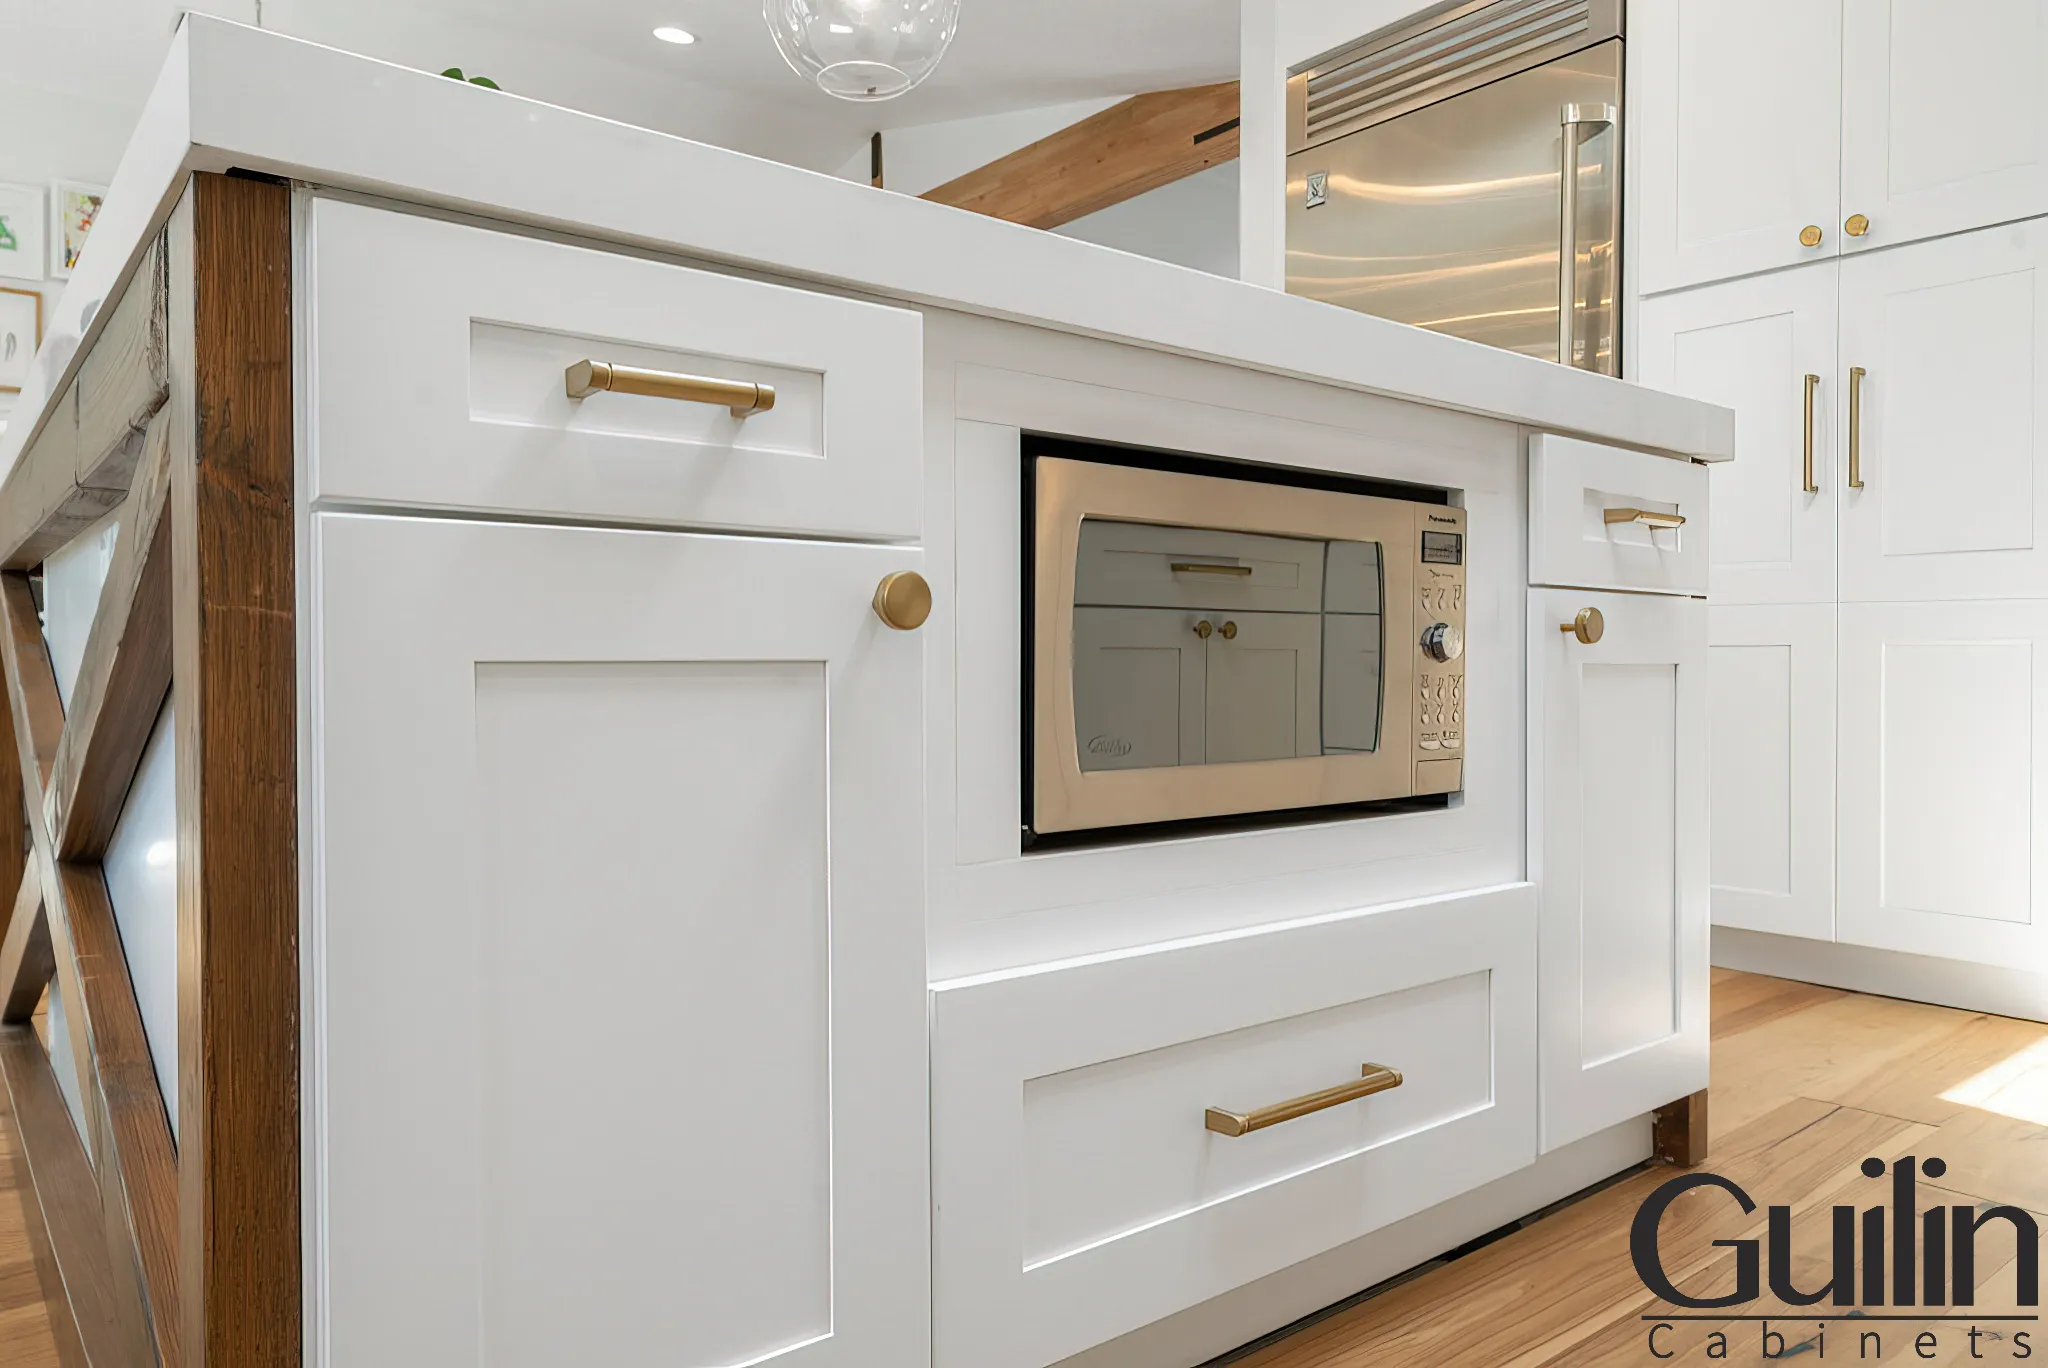 Refacing cabinets and closets are a good, and easy way to give your home's interior a fresh and updated look.